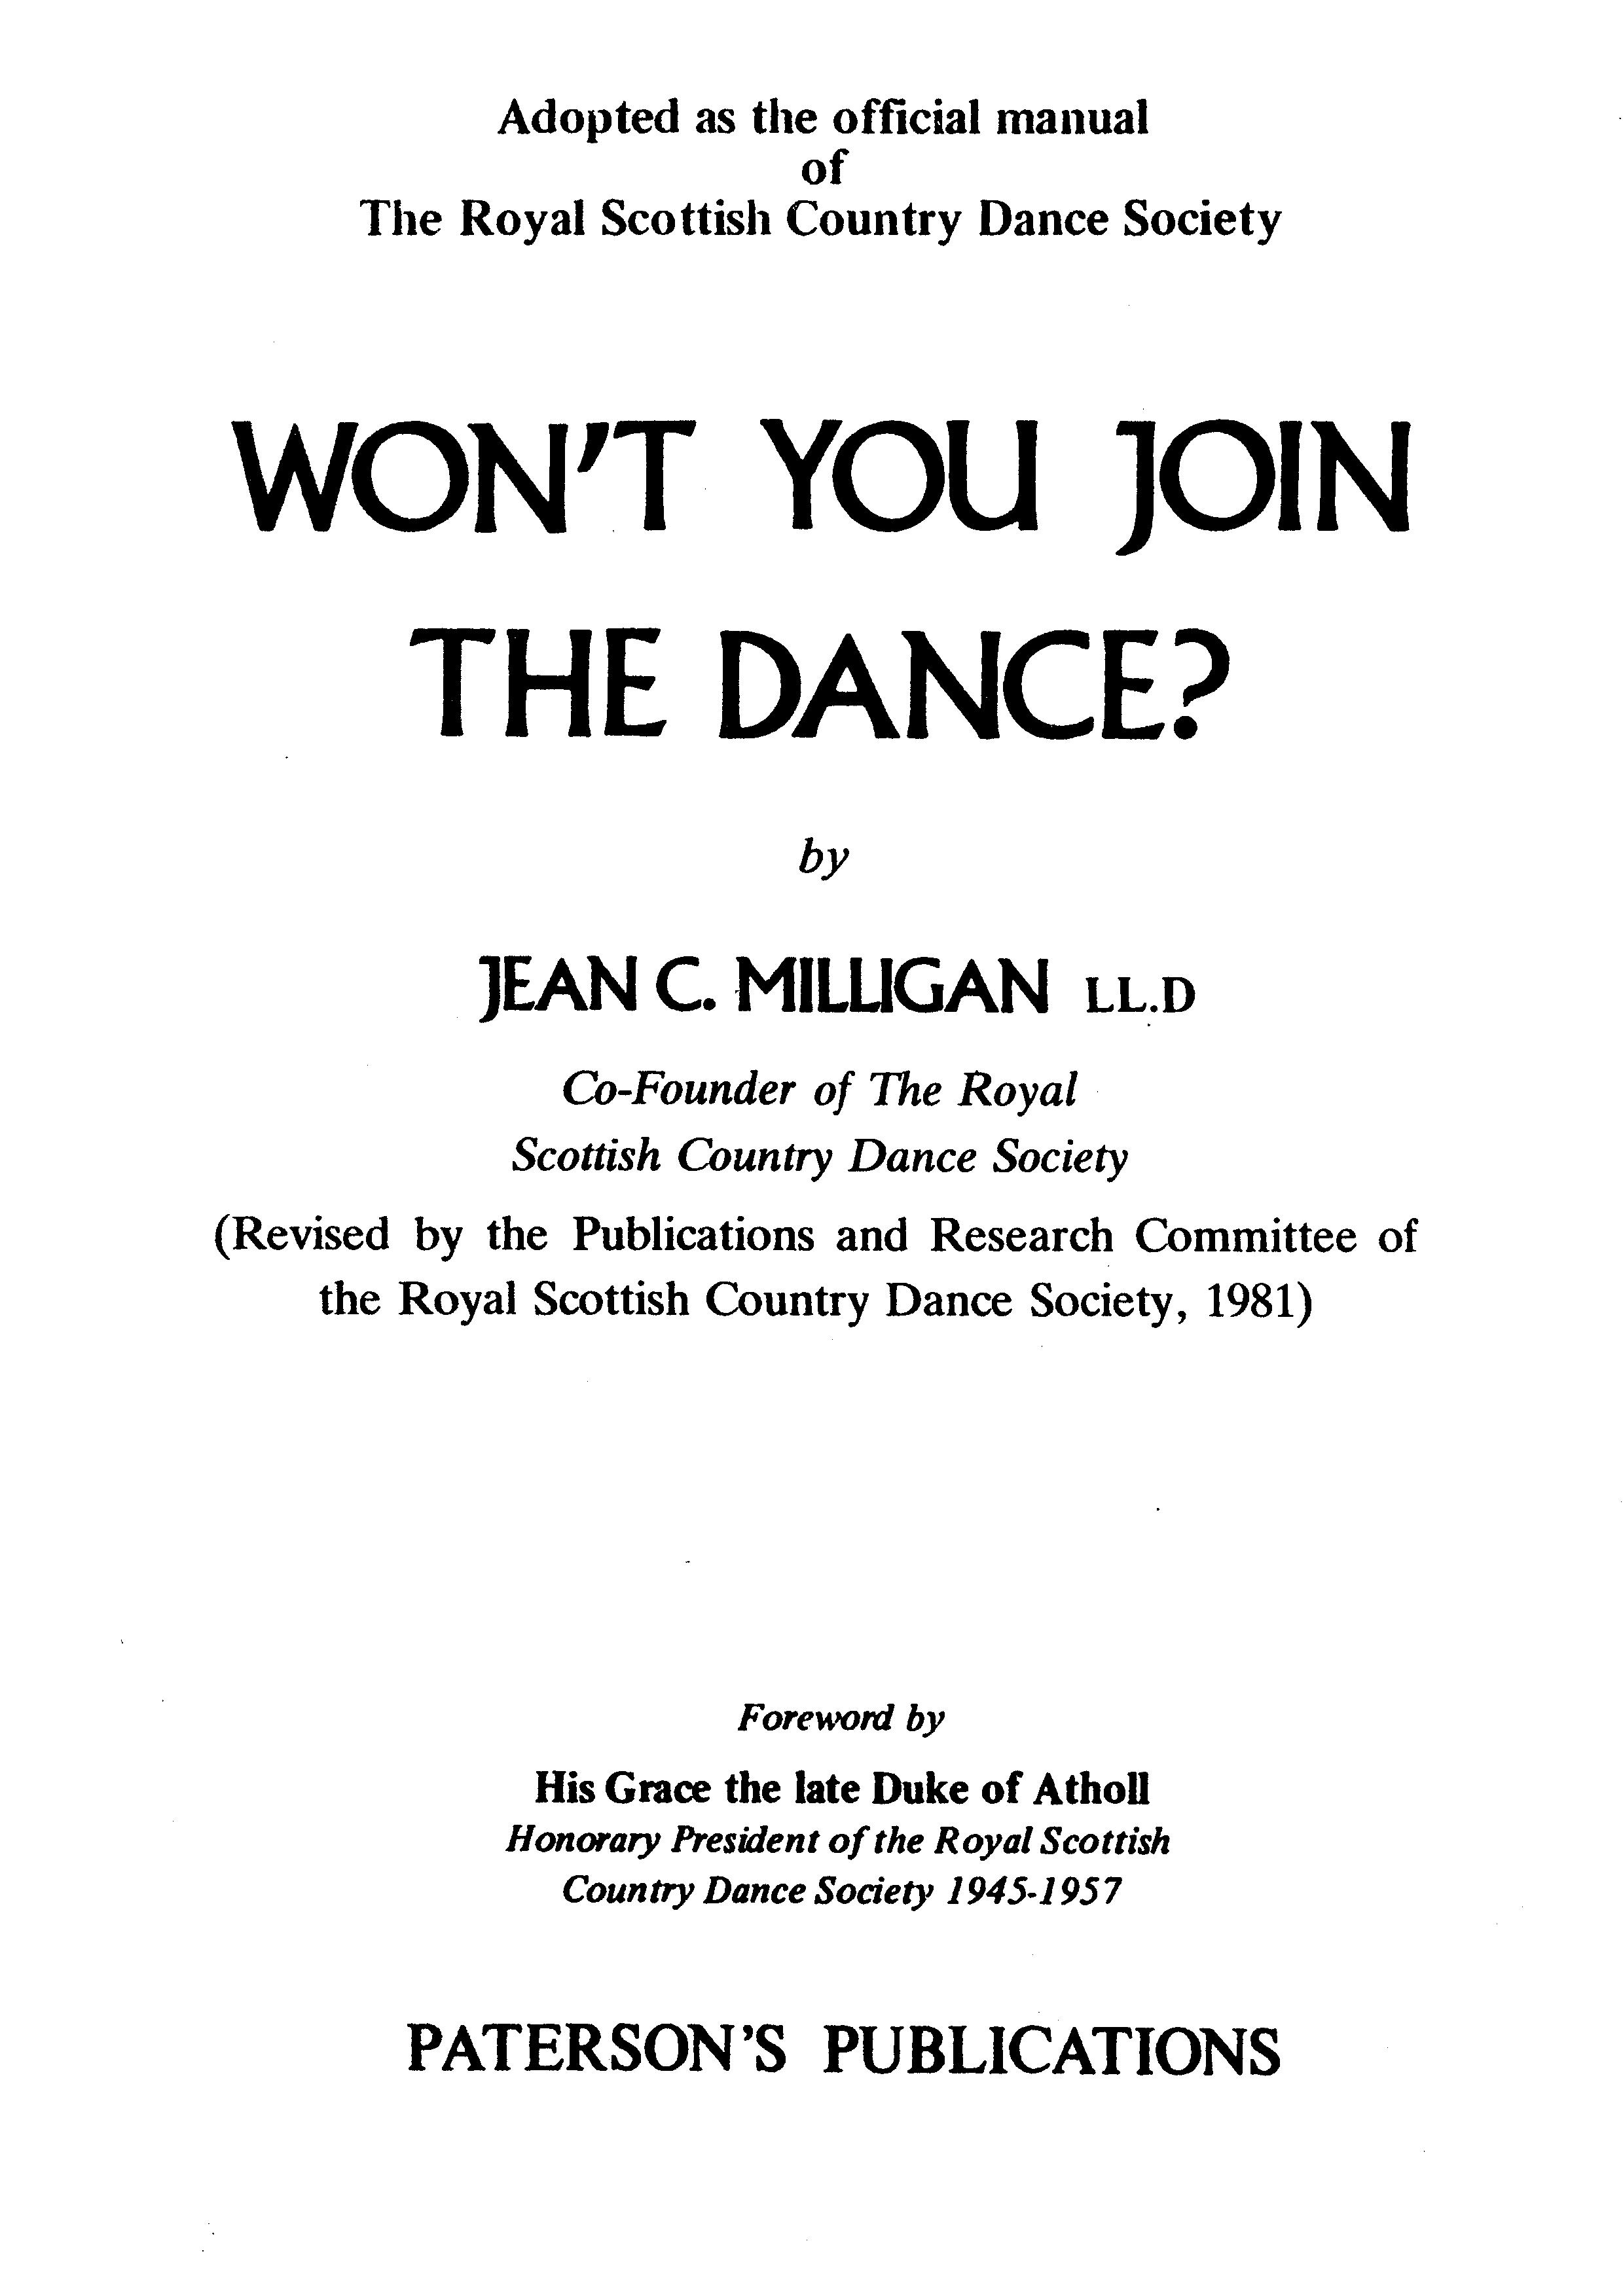 Jean C. Milligan: Won't You Join The Dance: Reference